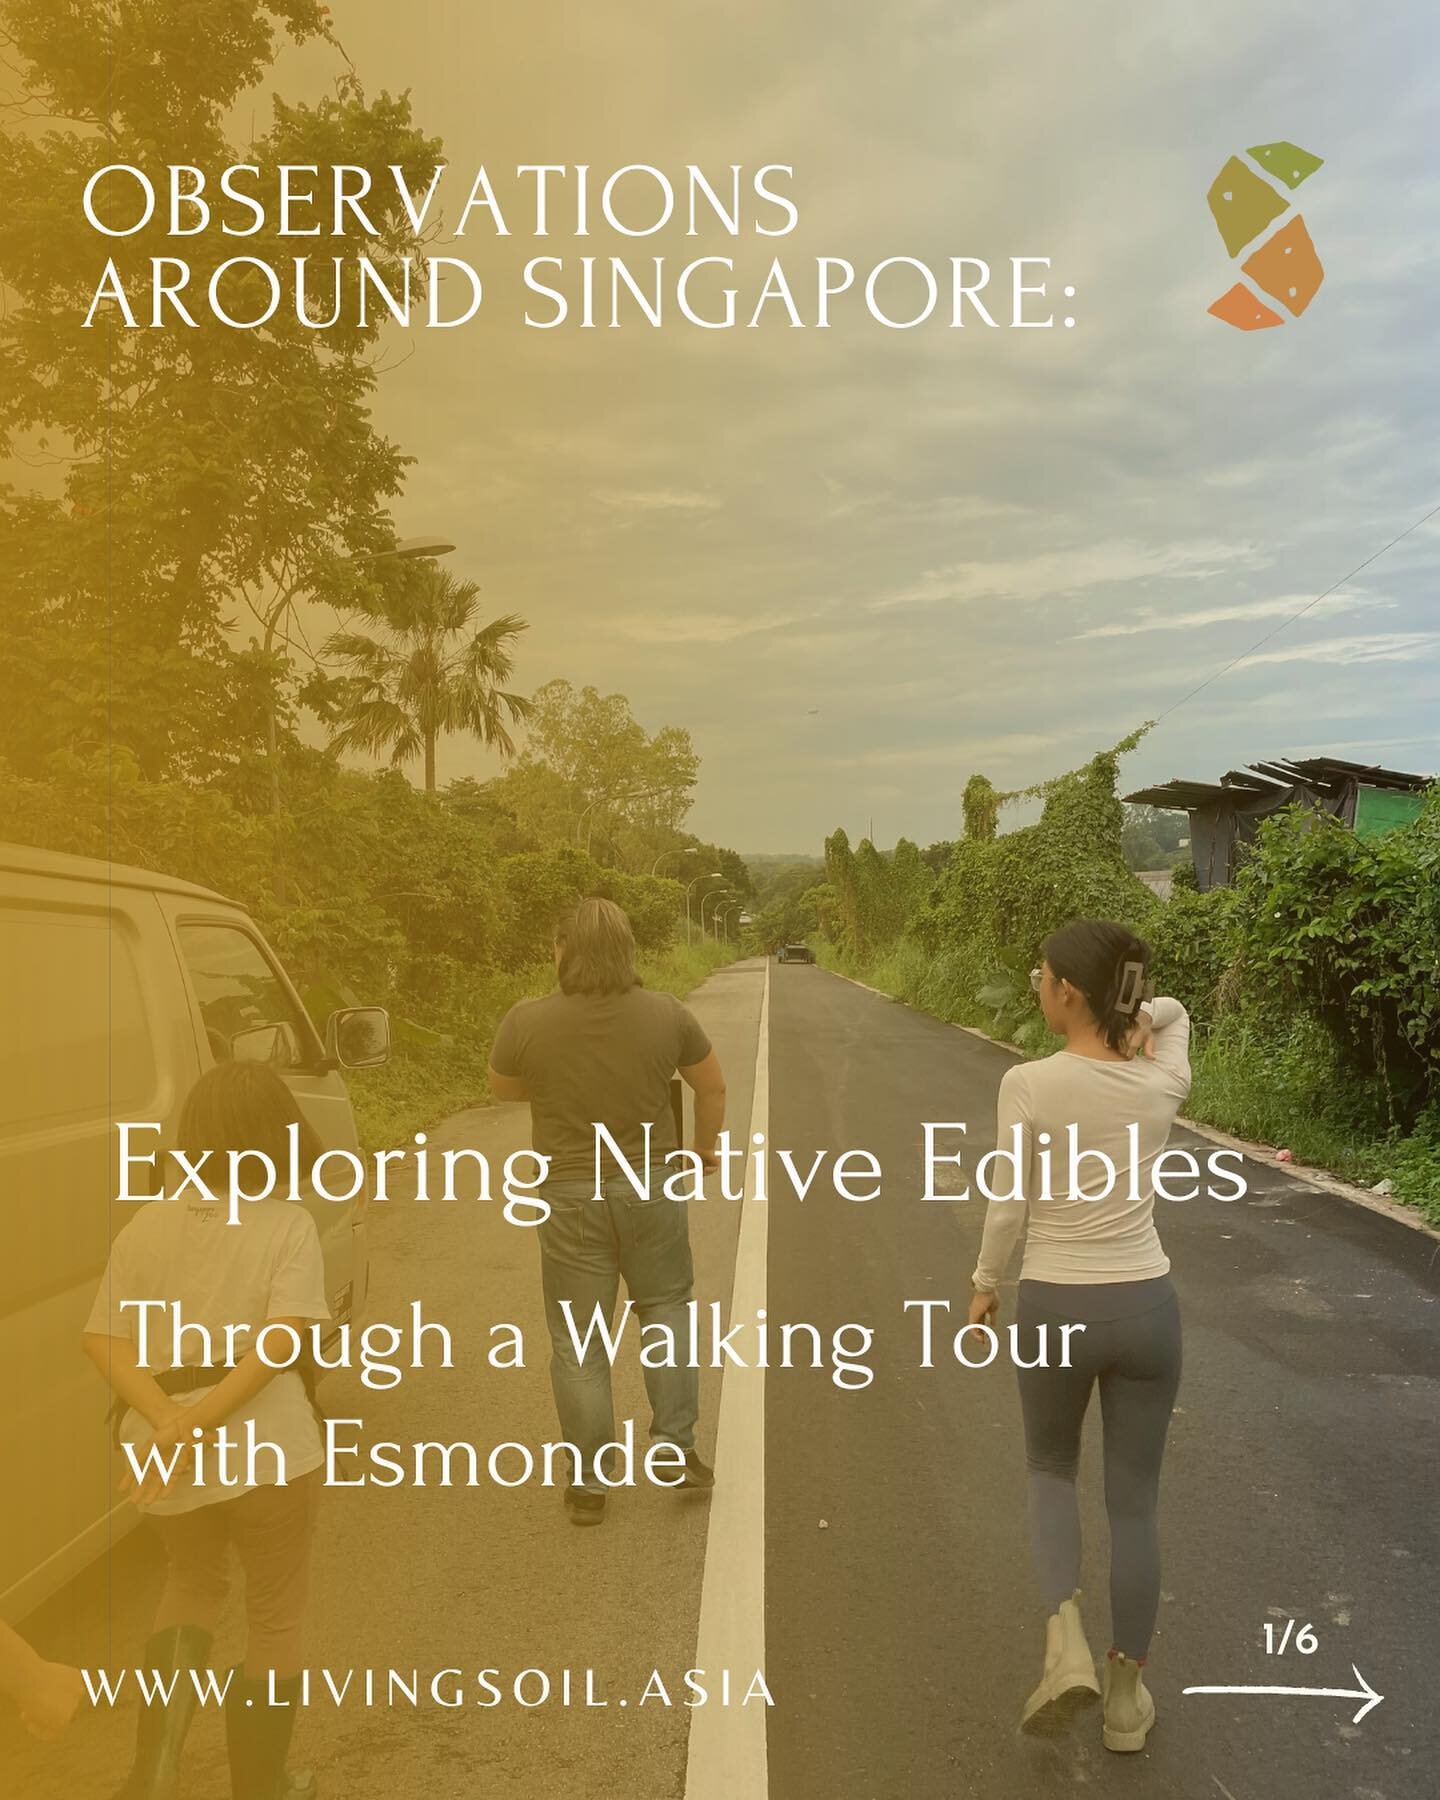 A few months ago, the Living Soil team went on an edible walking tour with Esmonde, @earthwalkerssg earthwalkersg in Sungei Tengah!

It was a sunny morning 🌞 , and as we walked down the road, we felt our vision expanding as Esmonde started pointing 